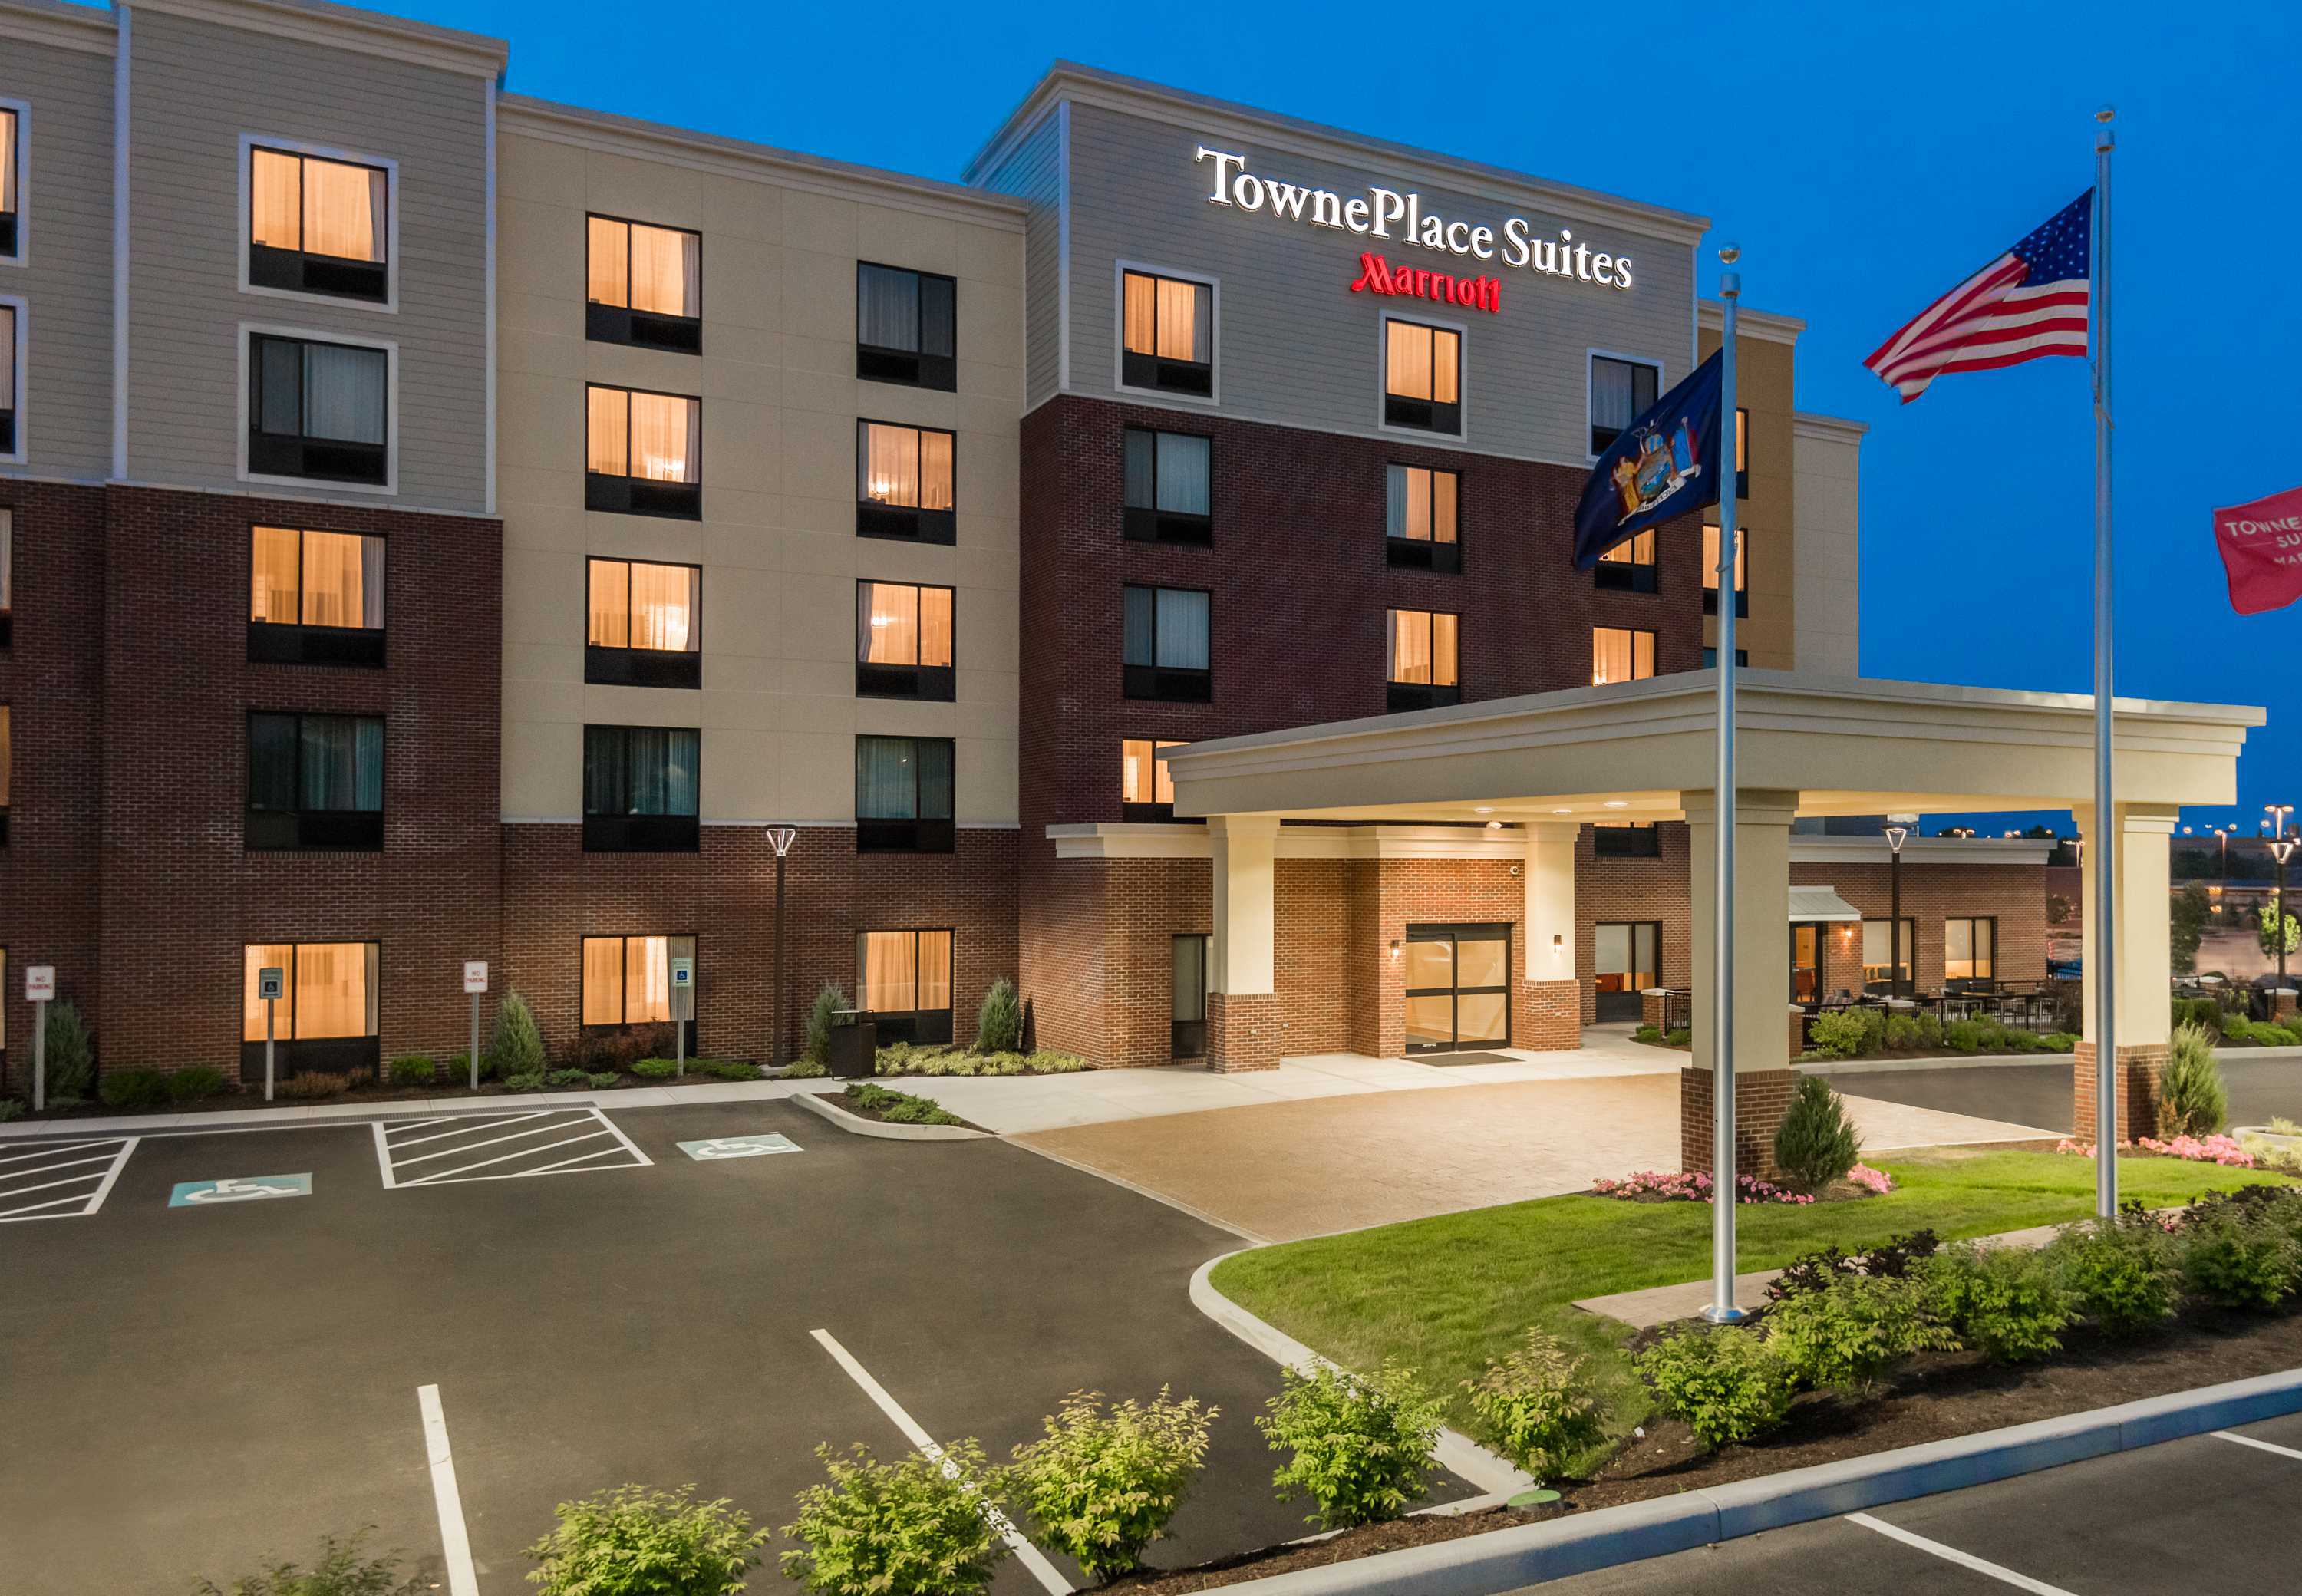 Photo of TownePlace Suites Latham Albany Airport, Latham, NY